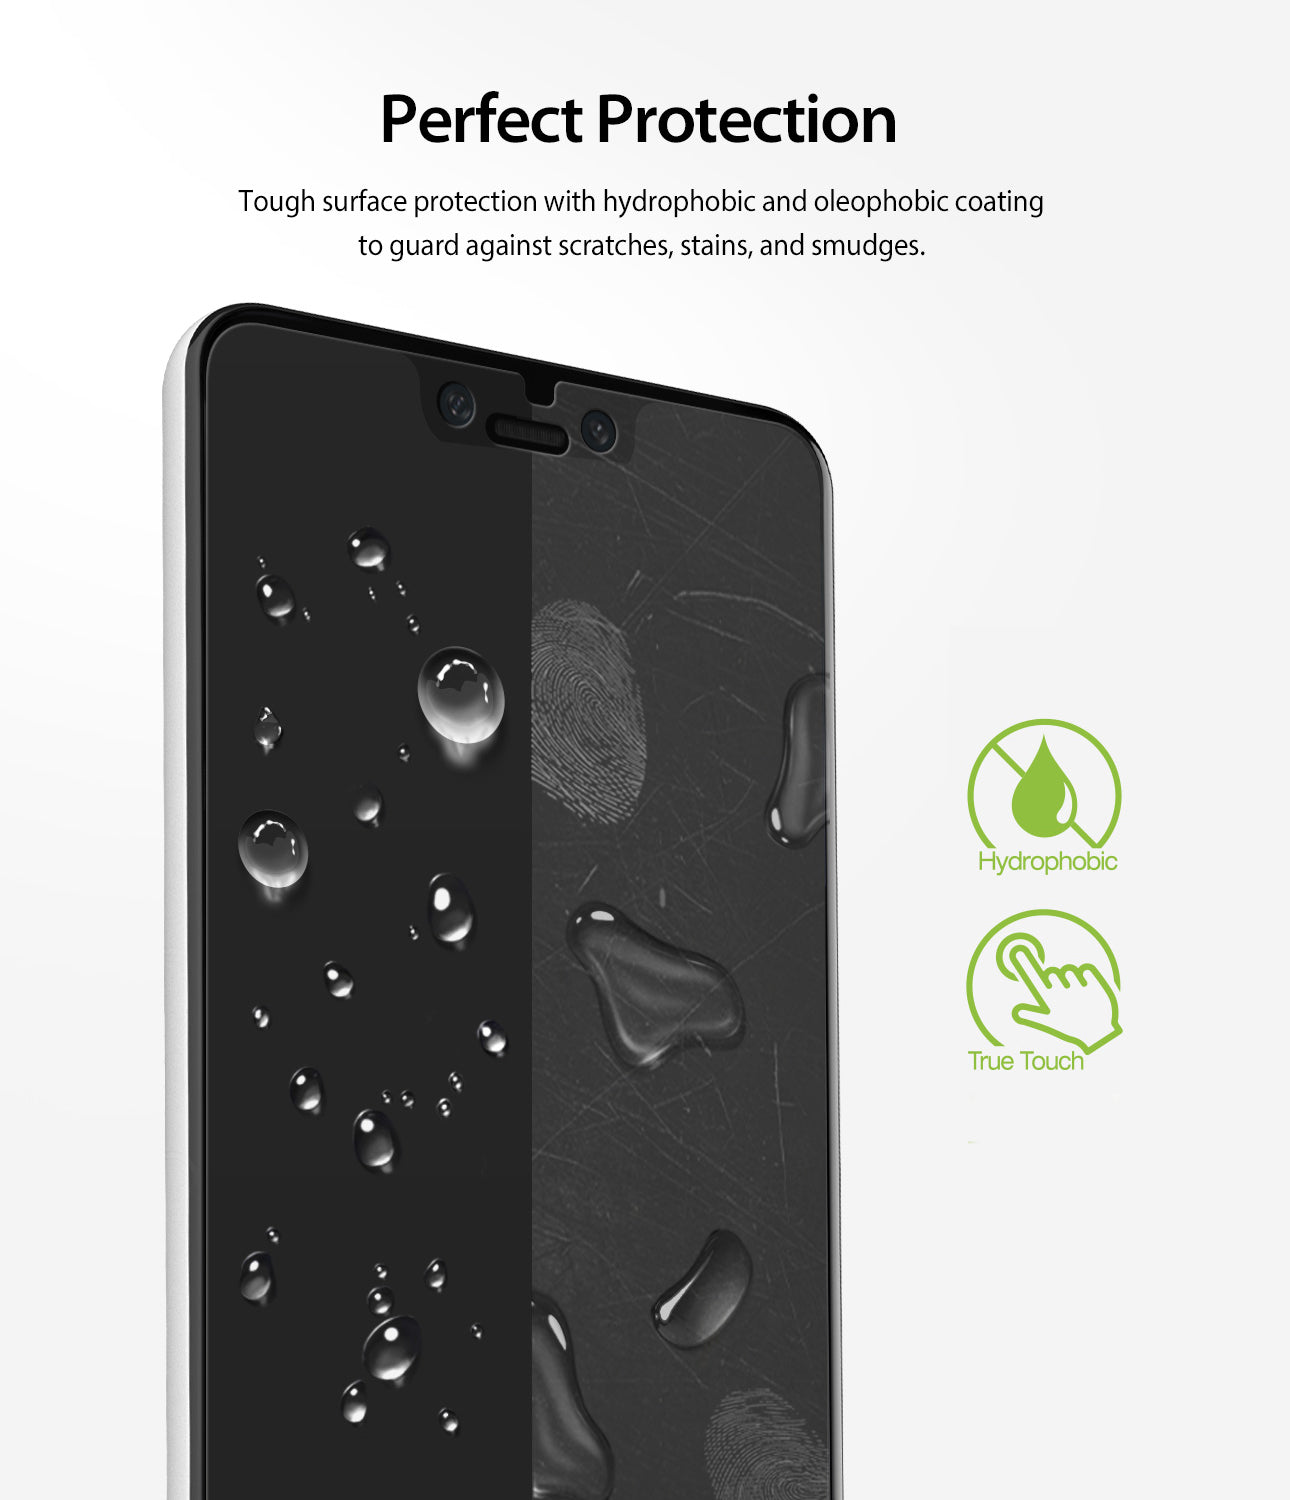 touch surface protection with hydrophobic and oleophobic coating